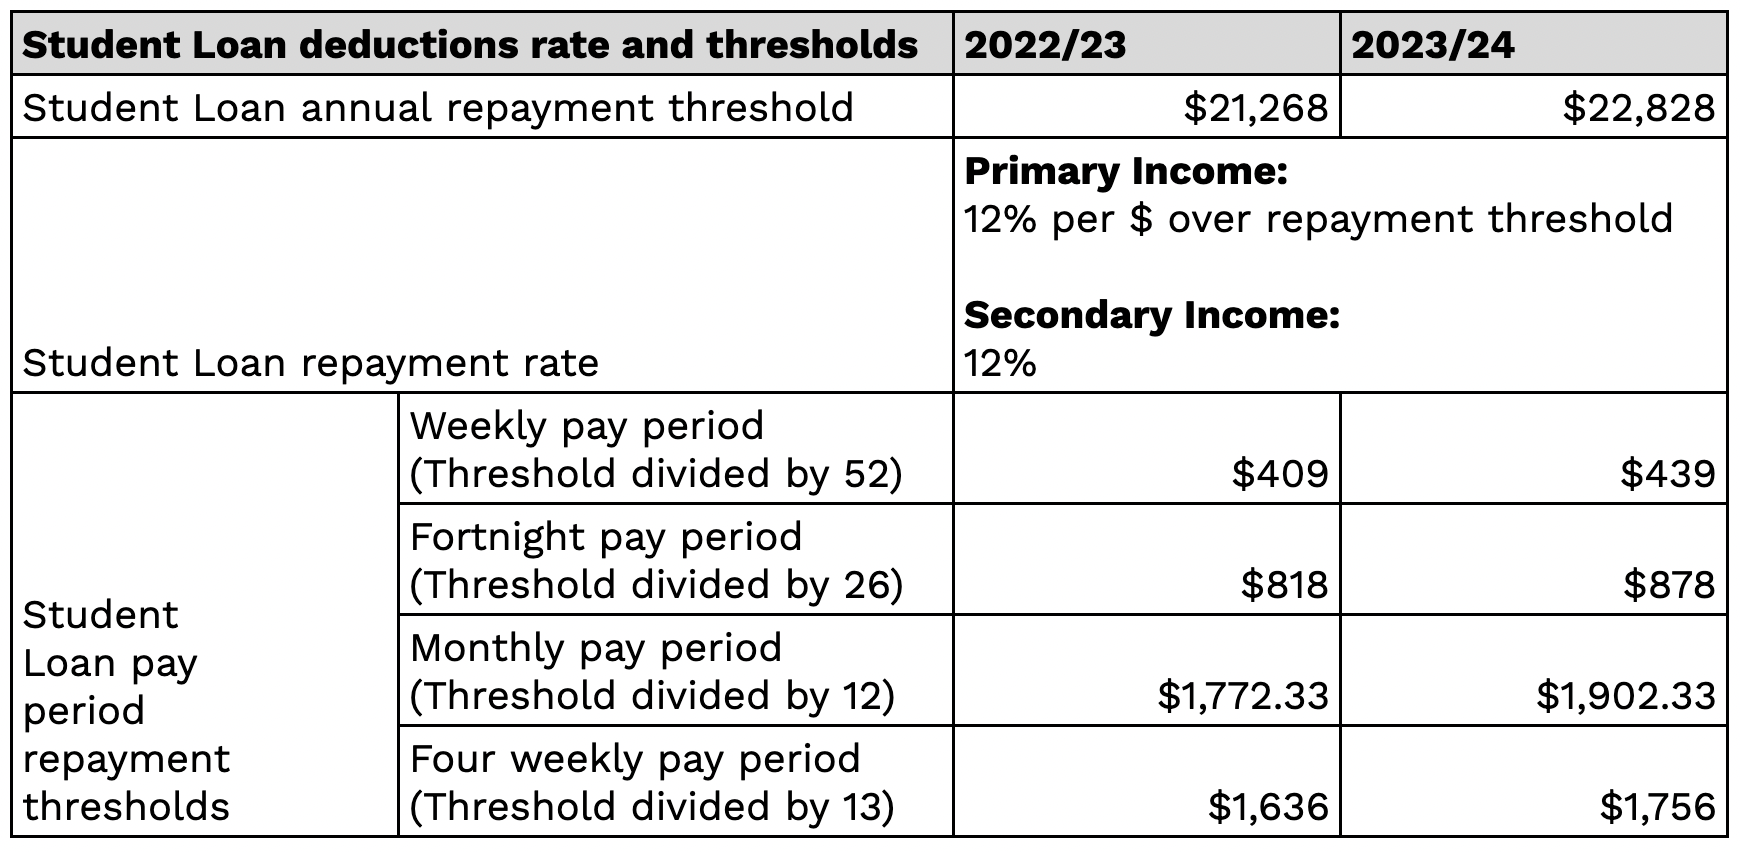 2023 Student Loan Rates and Thresholds